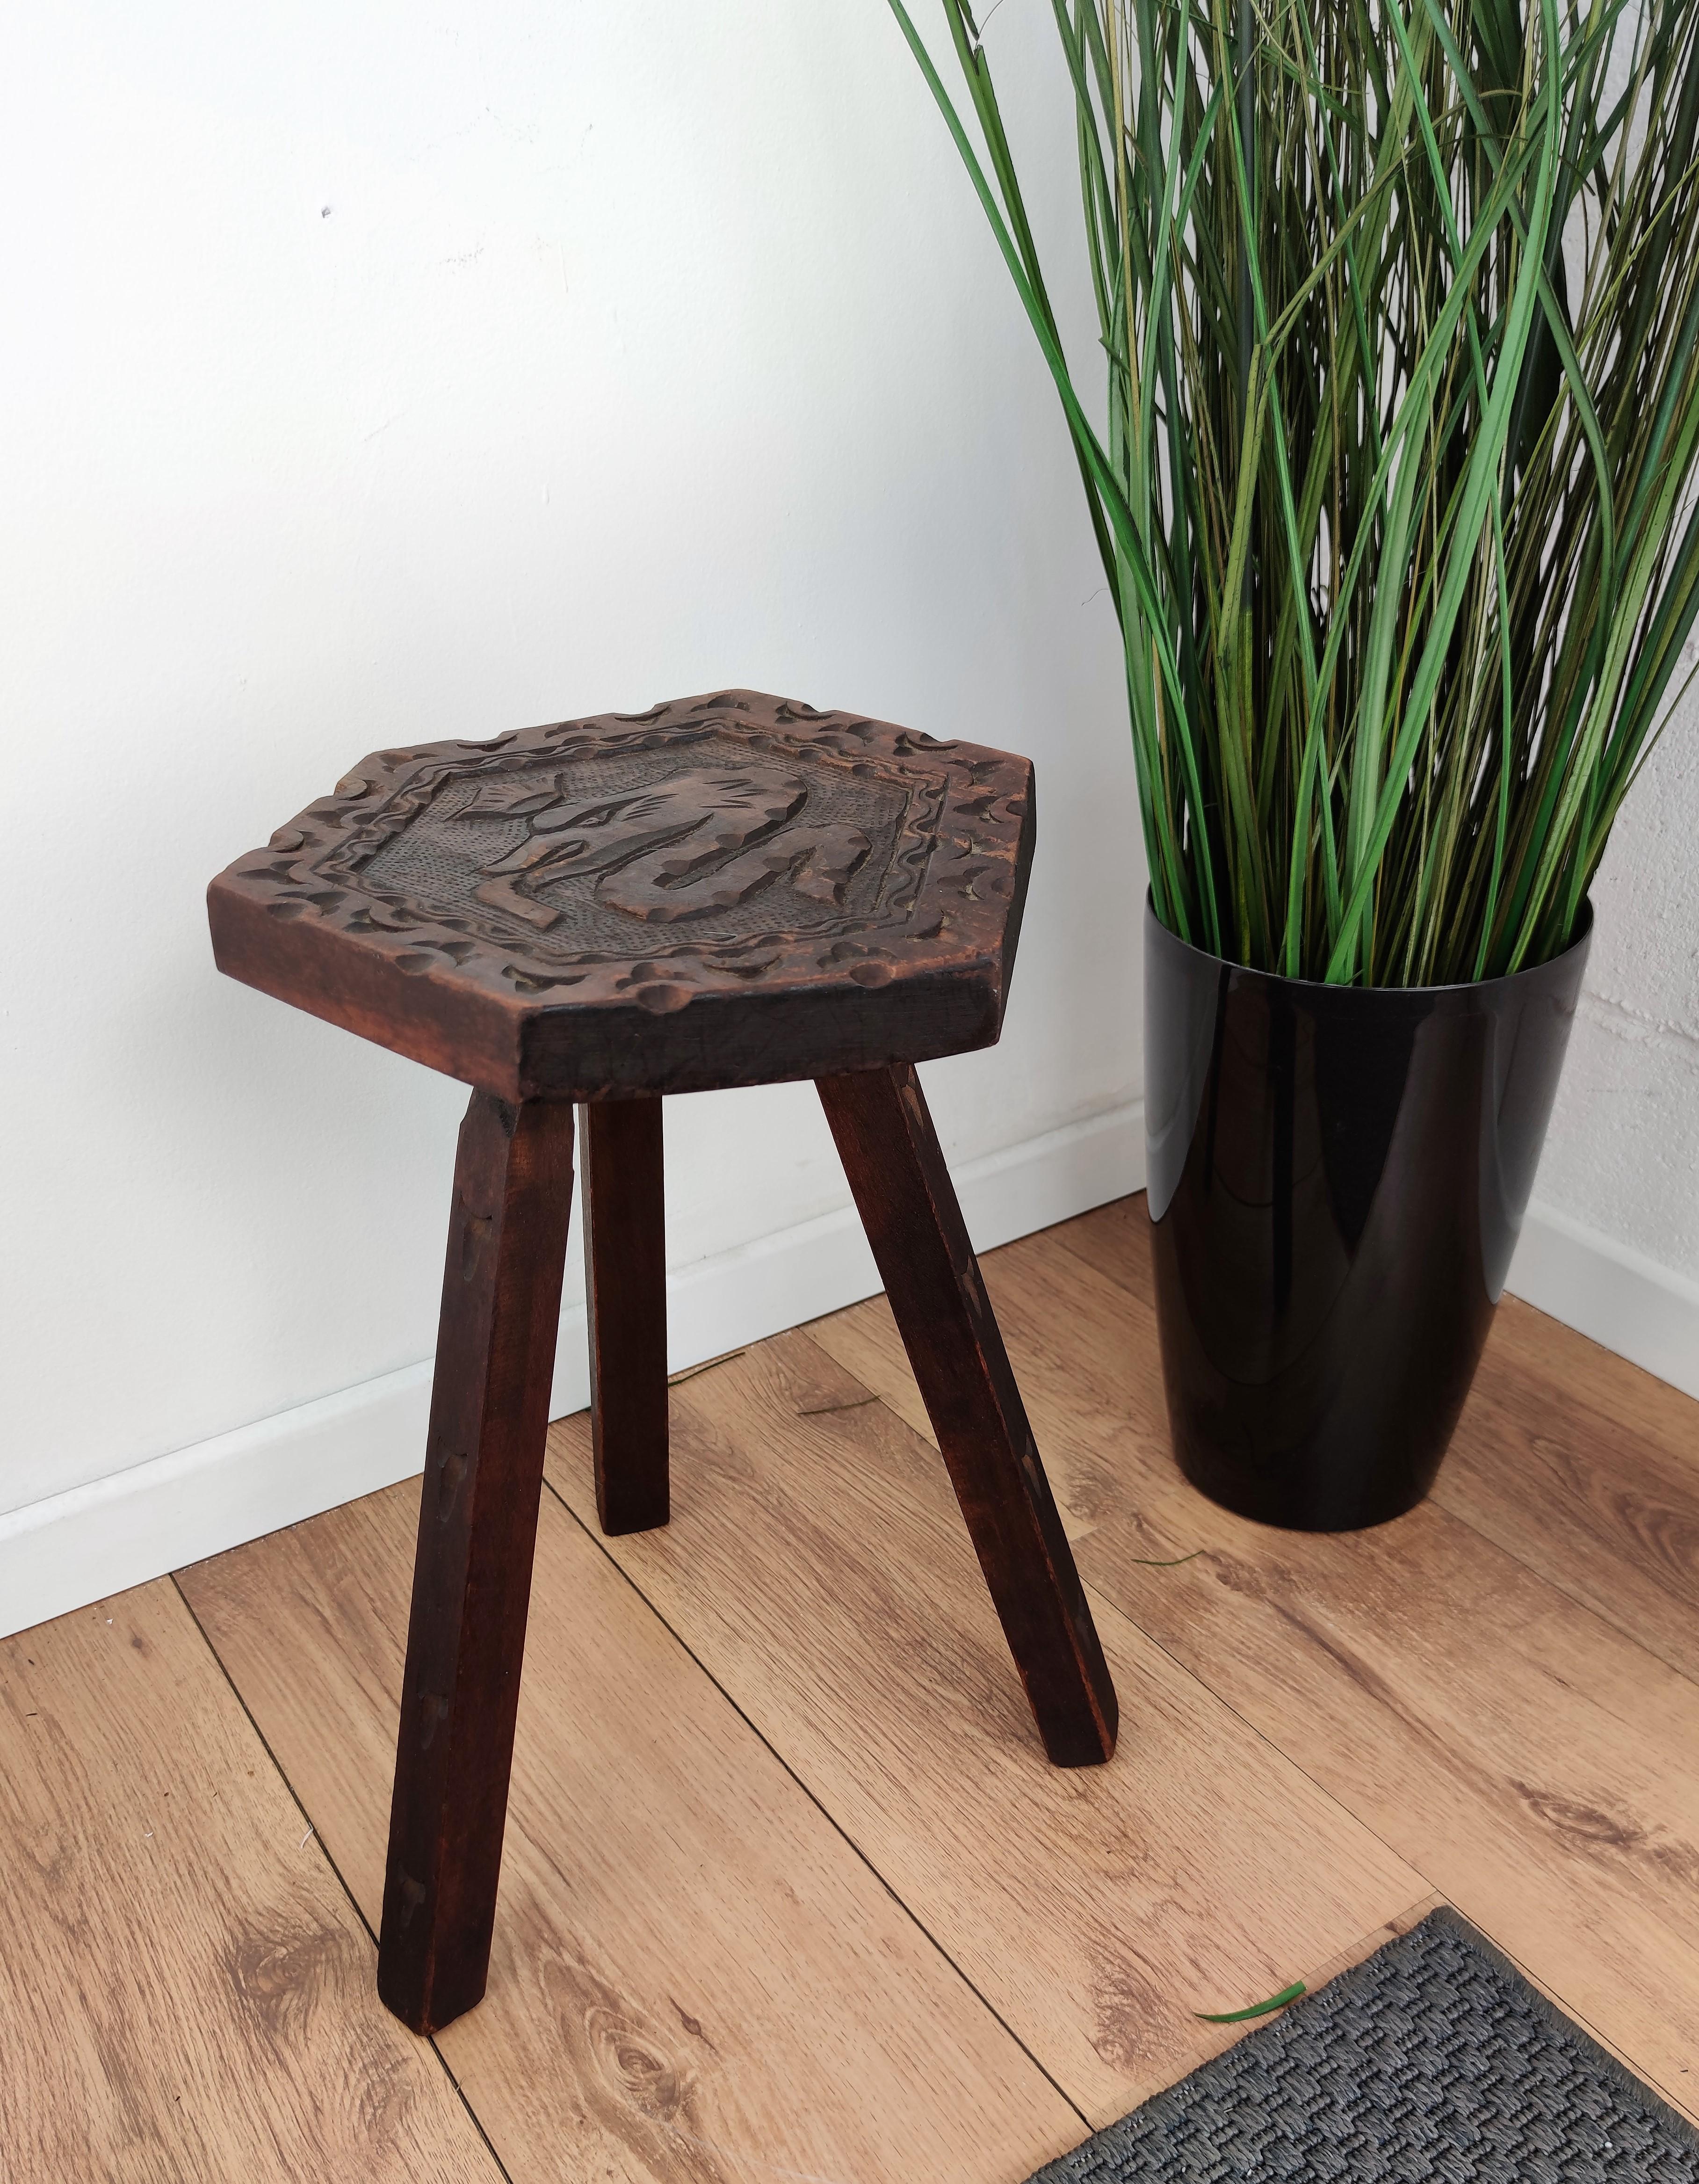 Beautiful Italian tripod stool or chair in carved wood with the so-called 'biscione' or grass snake with the crown, a historic symbol of the city of Milan, carved on the hexagonal top seat and detailed carving on each of the three legs.